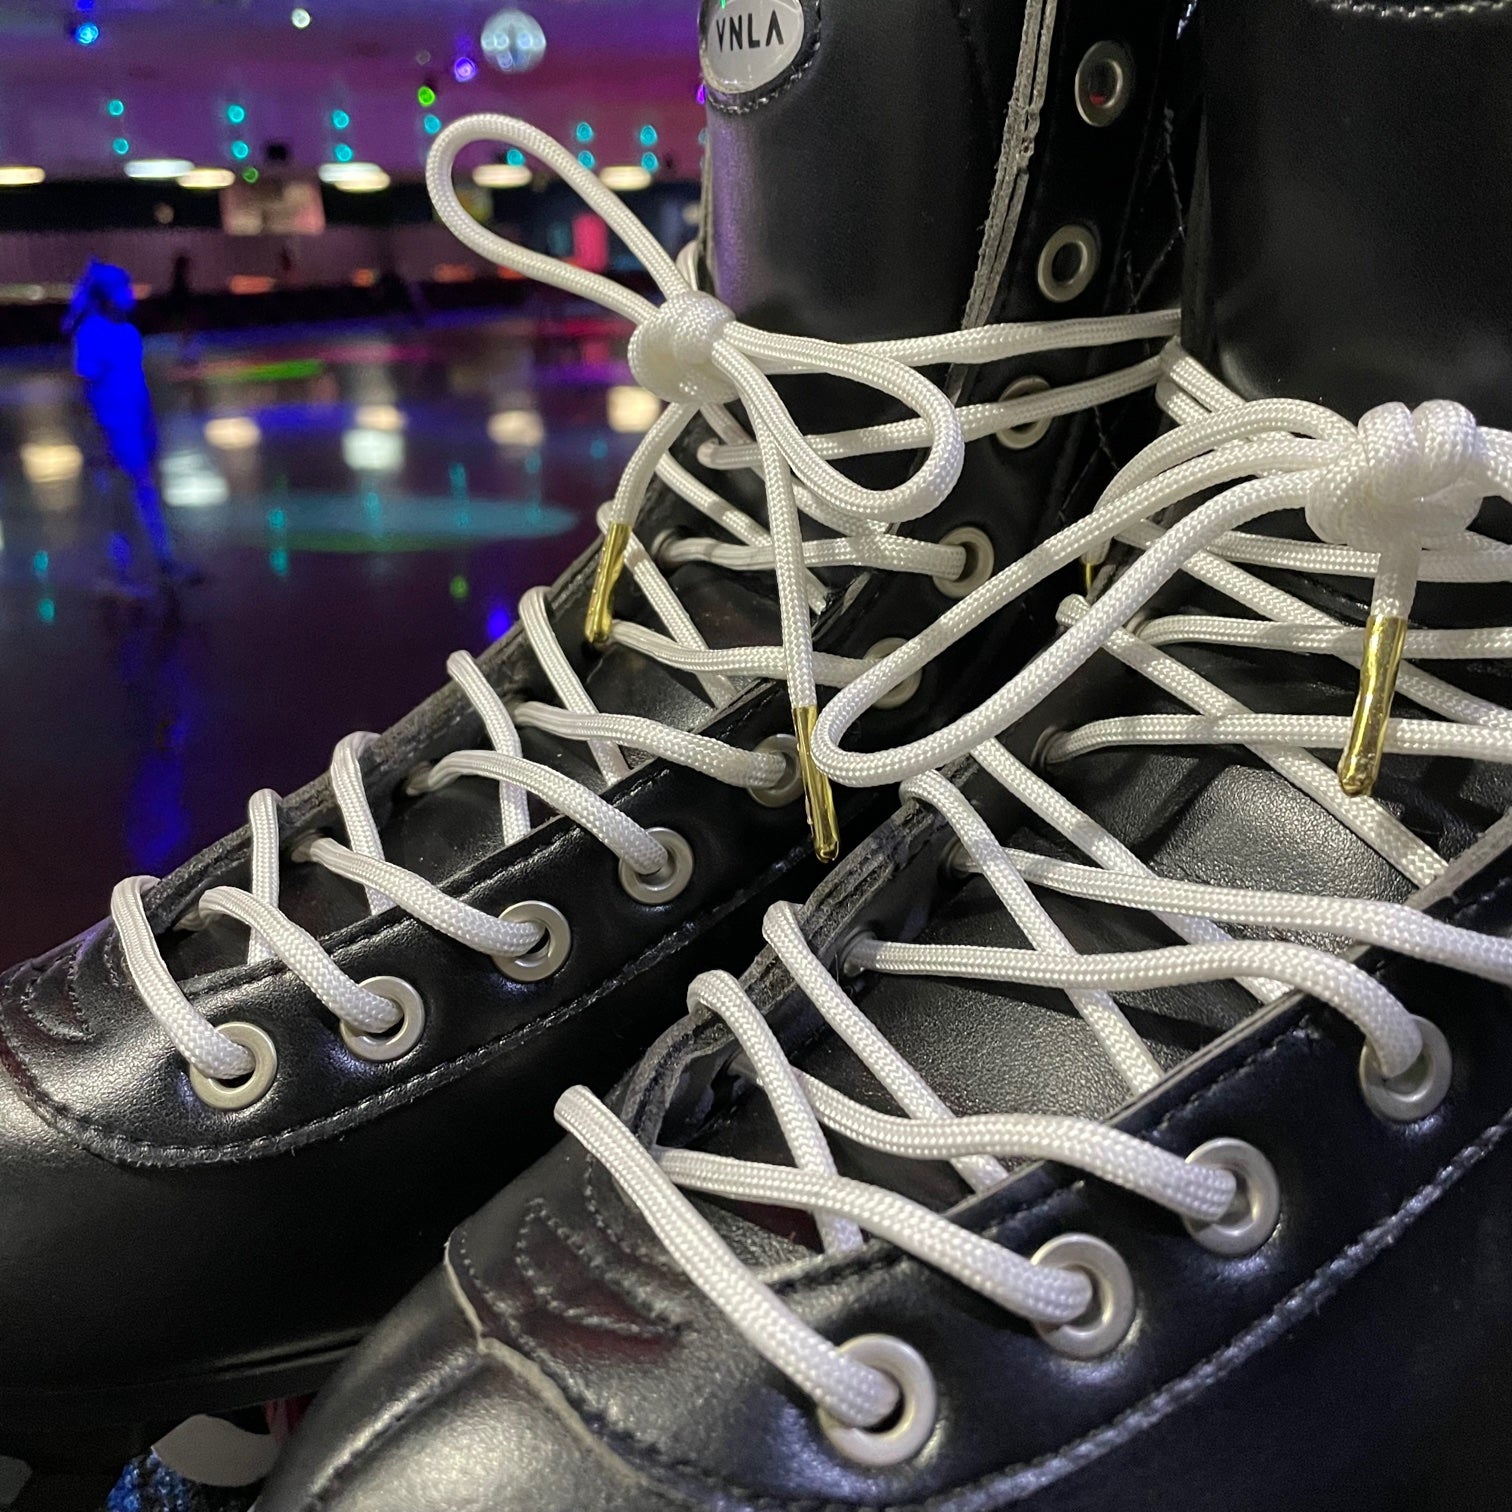 Laces – The Motown Roller Club